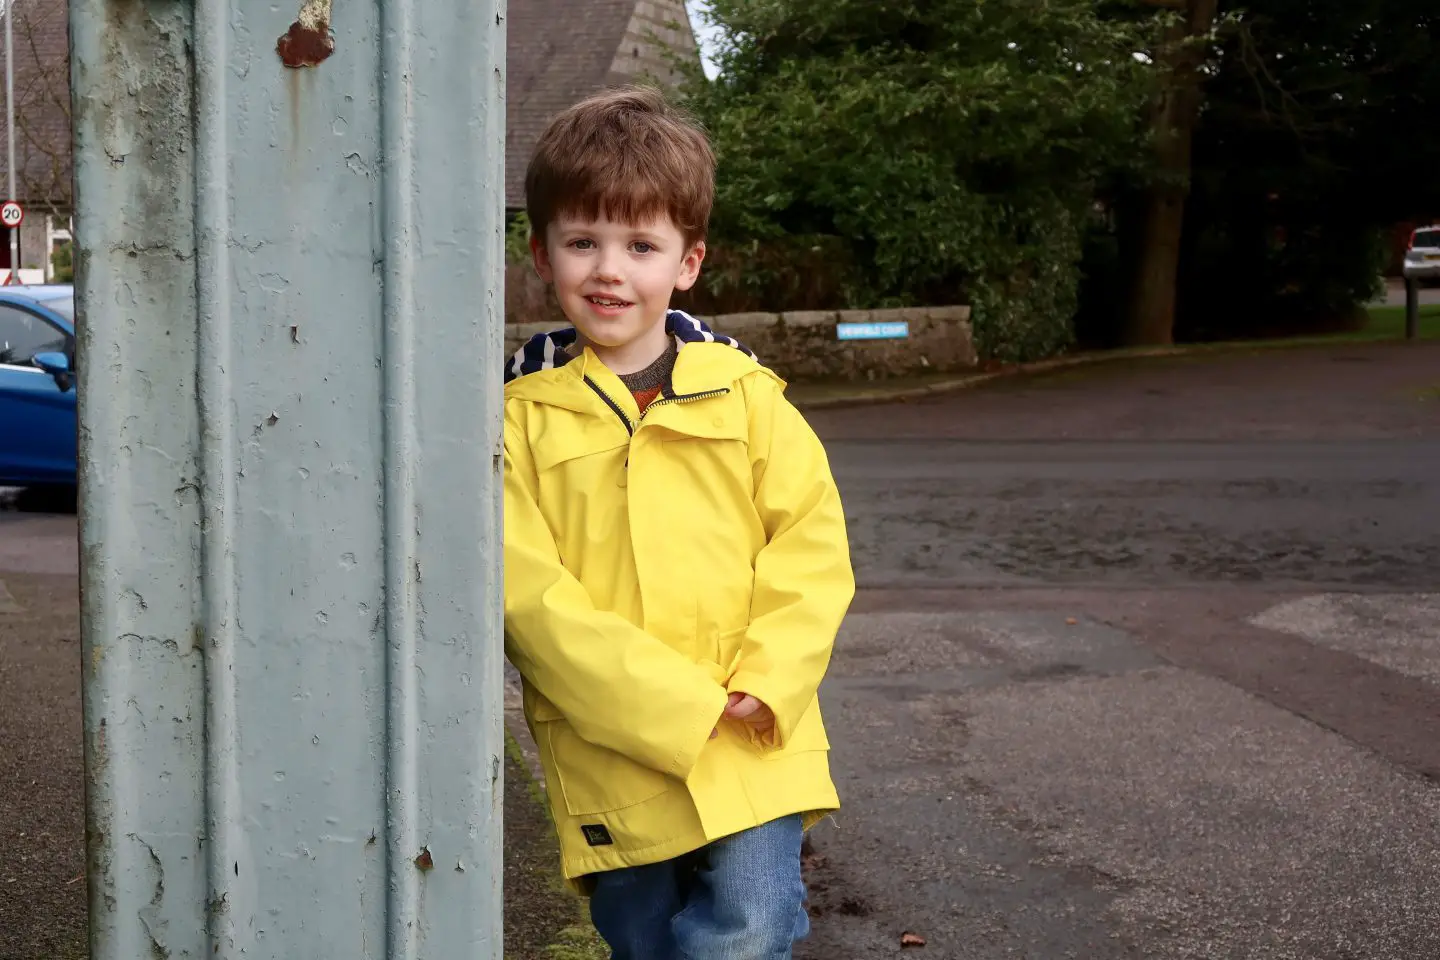 A boy in a yellow jacket standing on the side of the street and leaning against a green box.